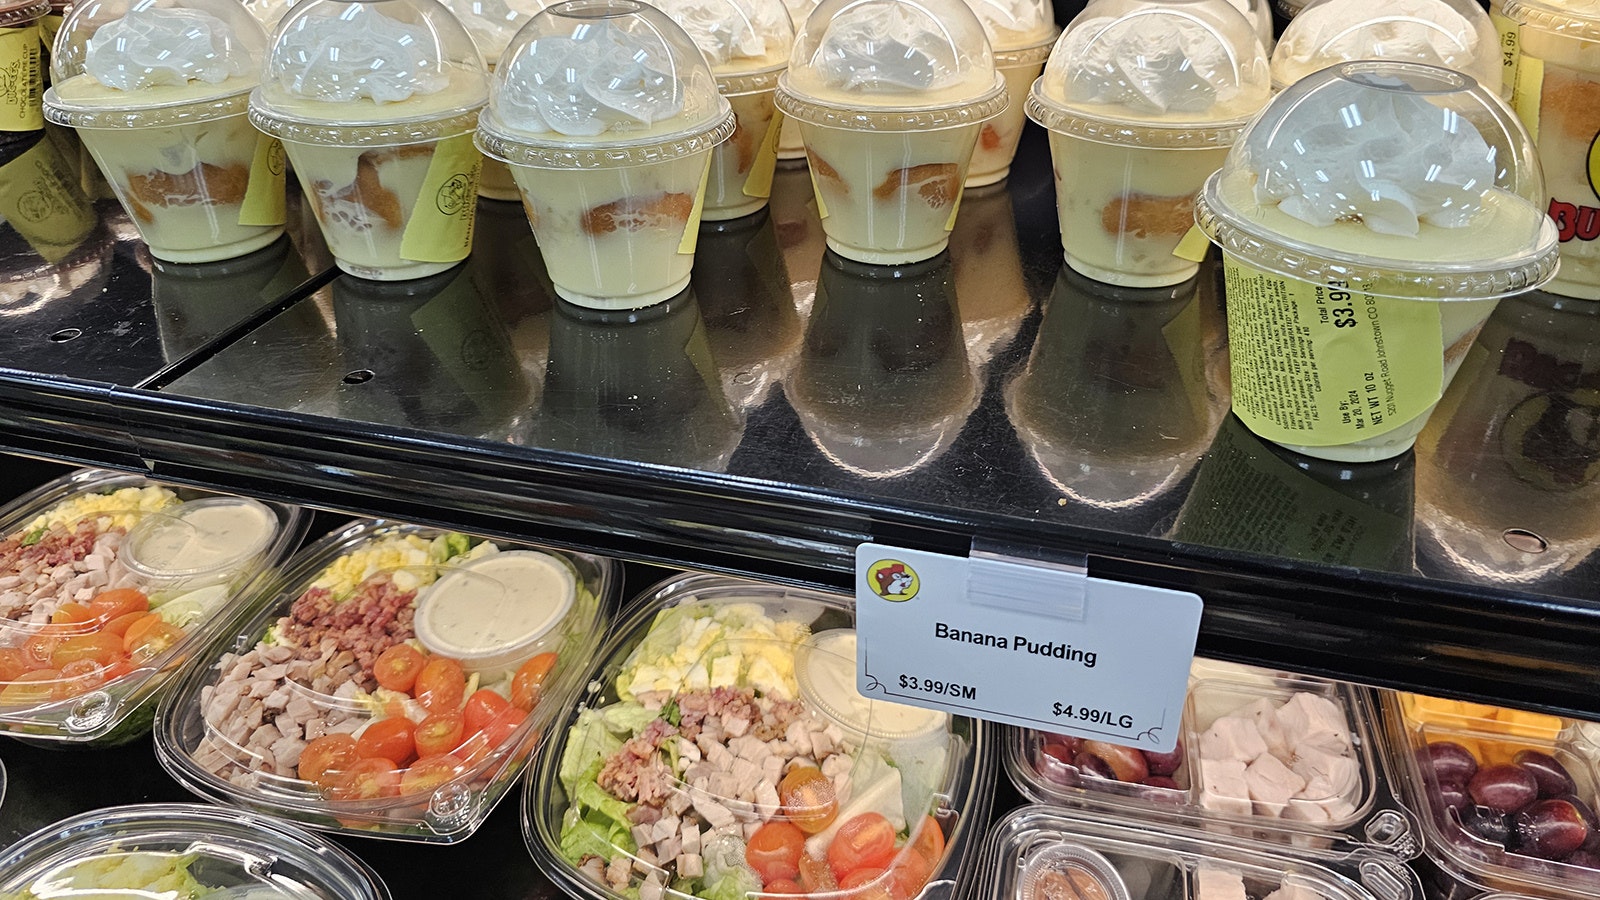 Pudding cups right above the salad. Talk about temptation.